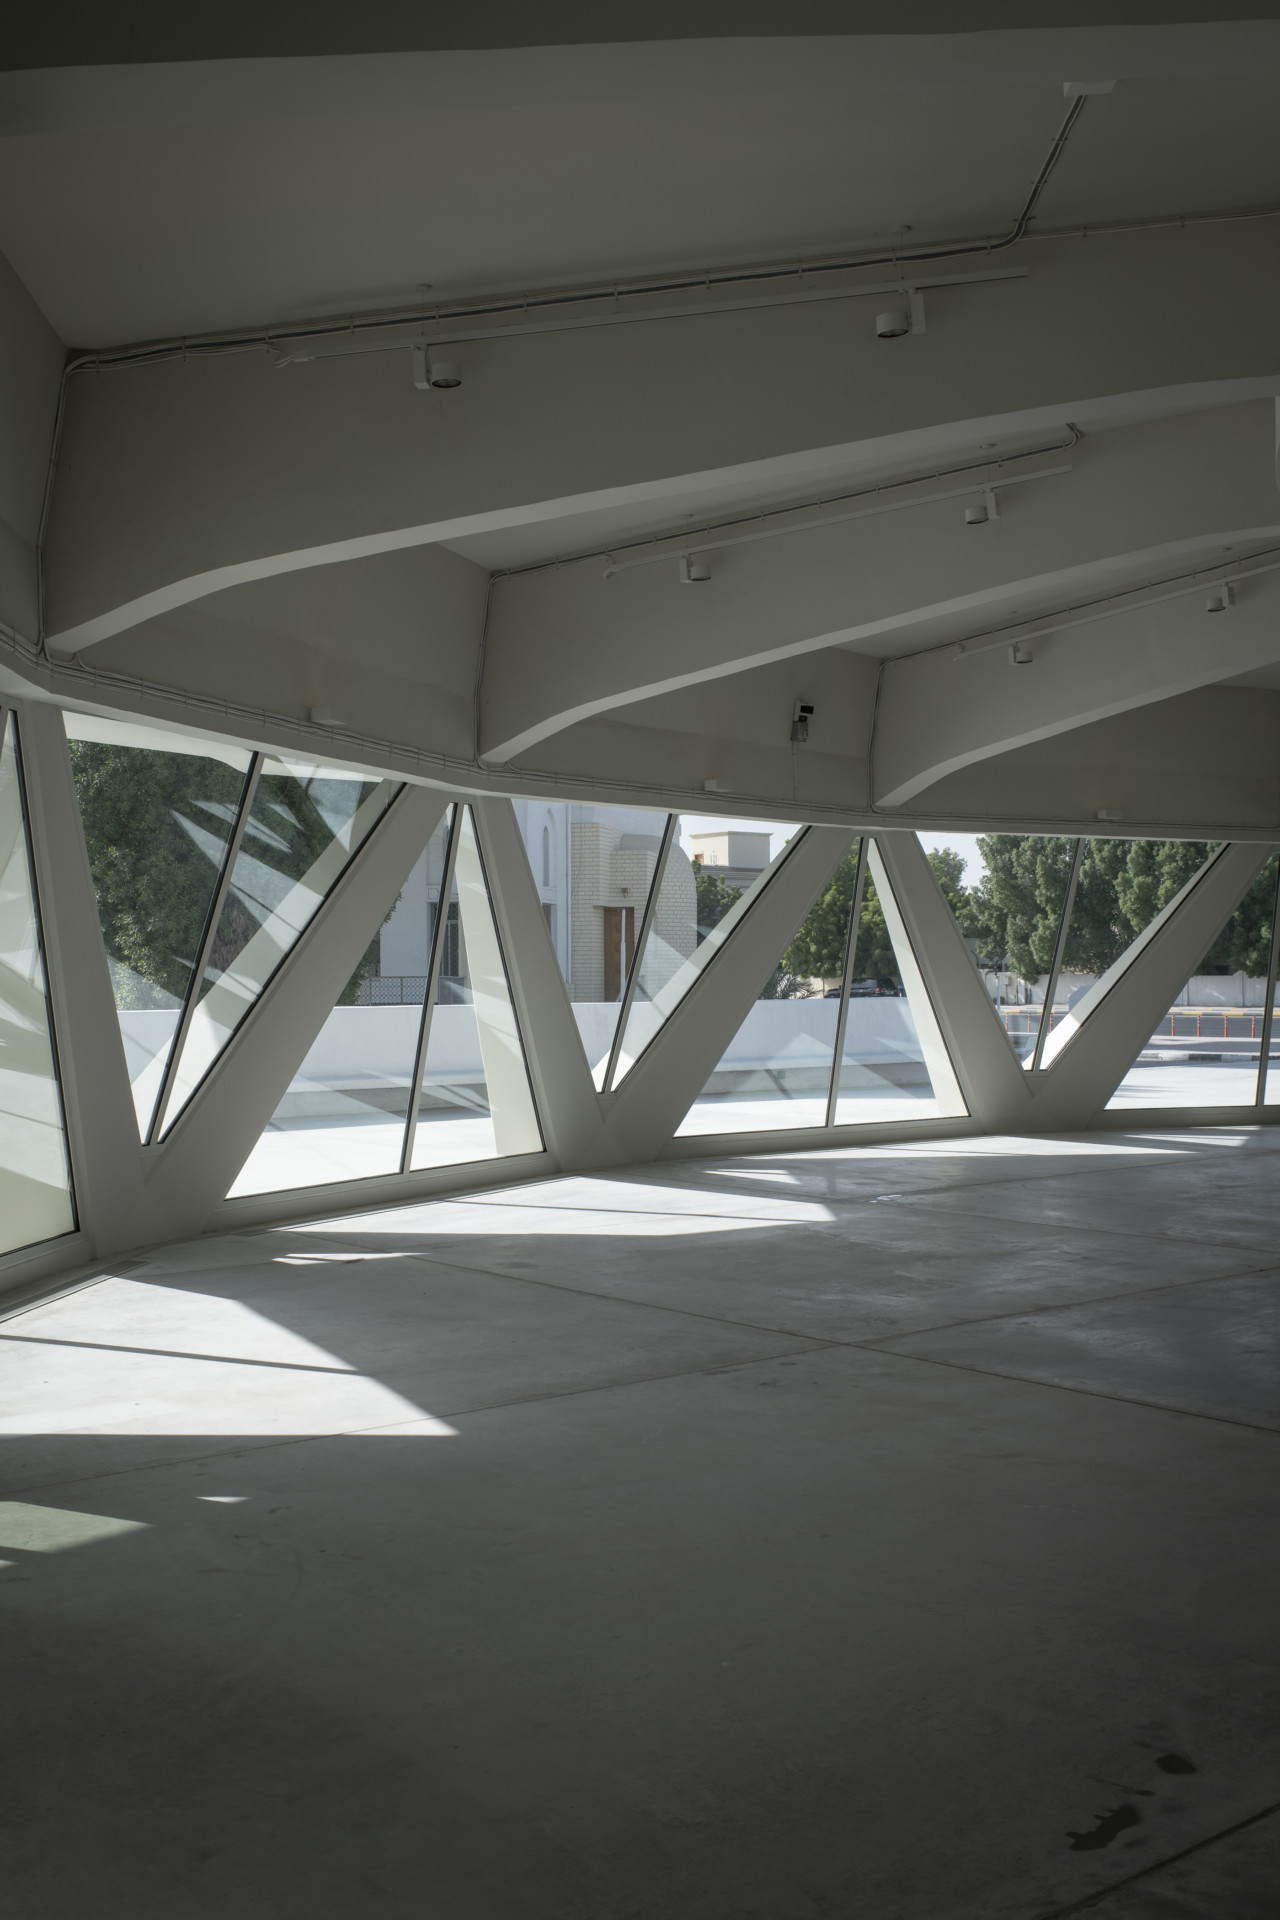 Interior of a concrete pavilion with concrete floors and structure